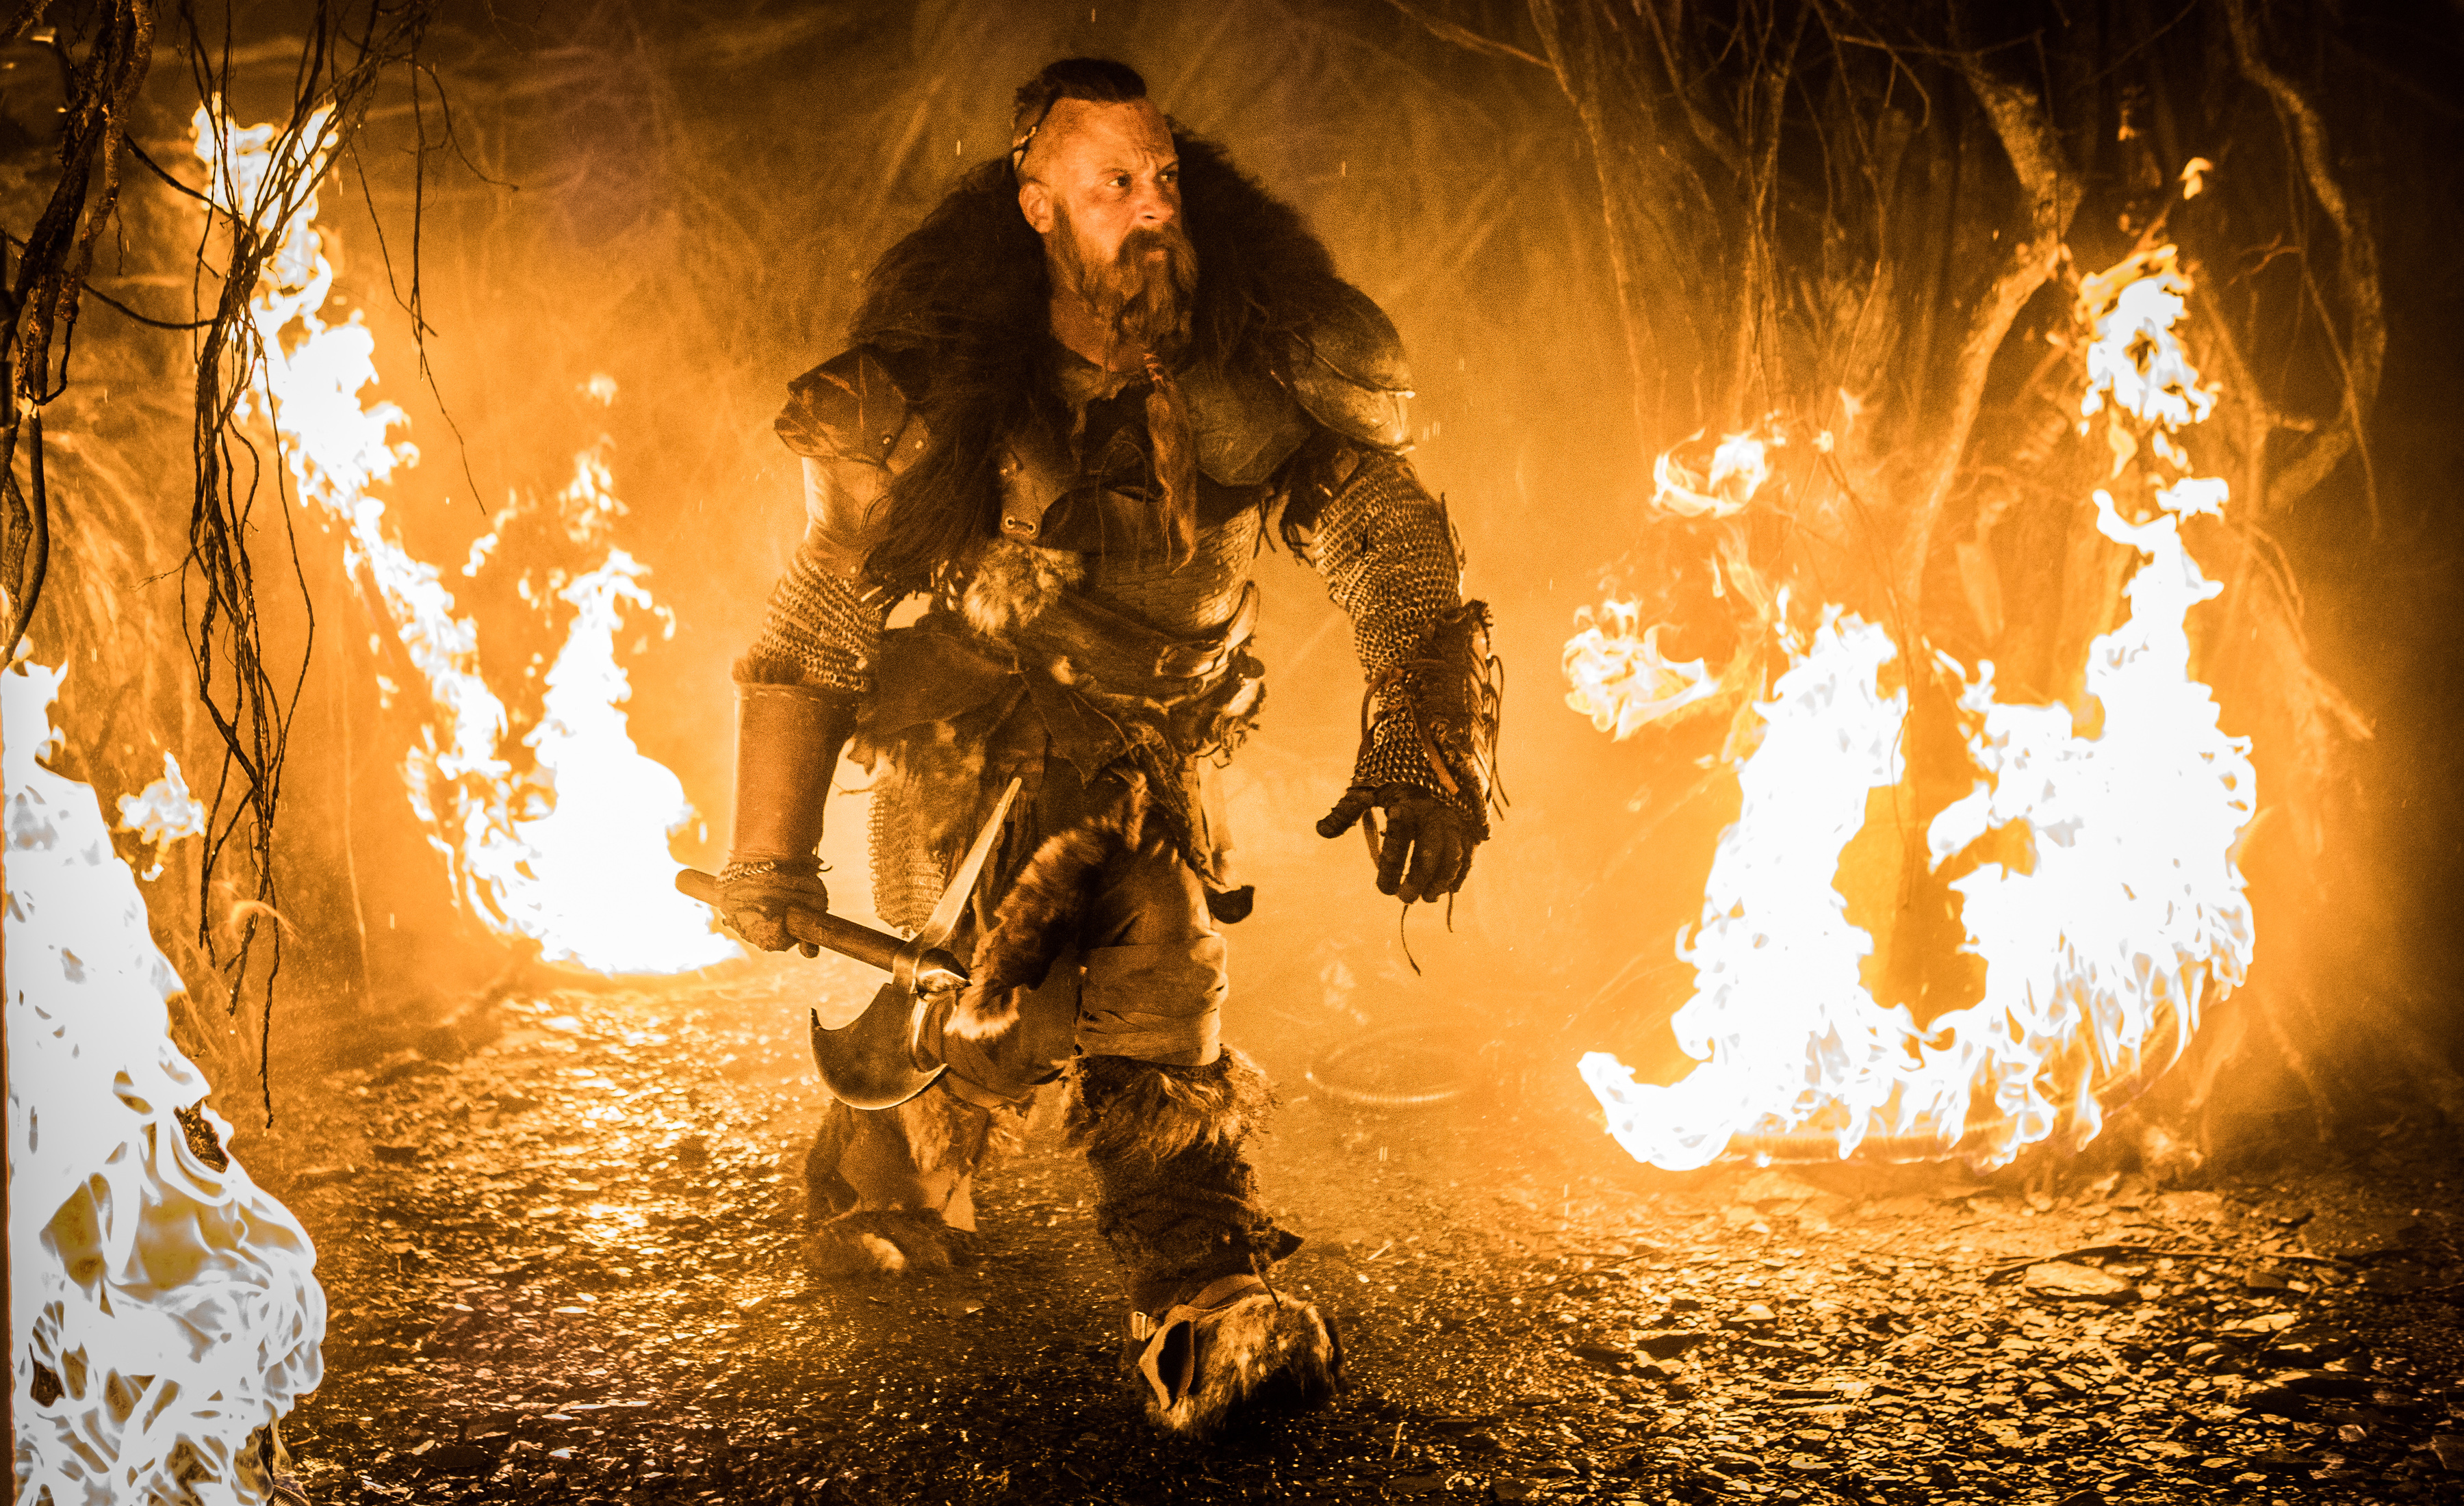 Vin Diesel The Last Witch Hunter Wallpapers